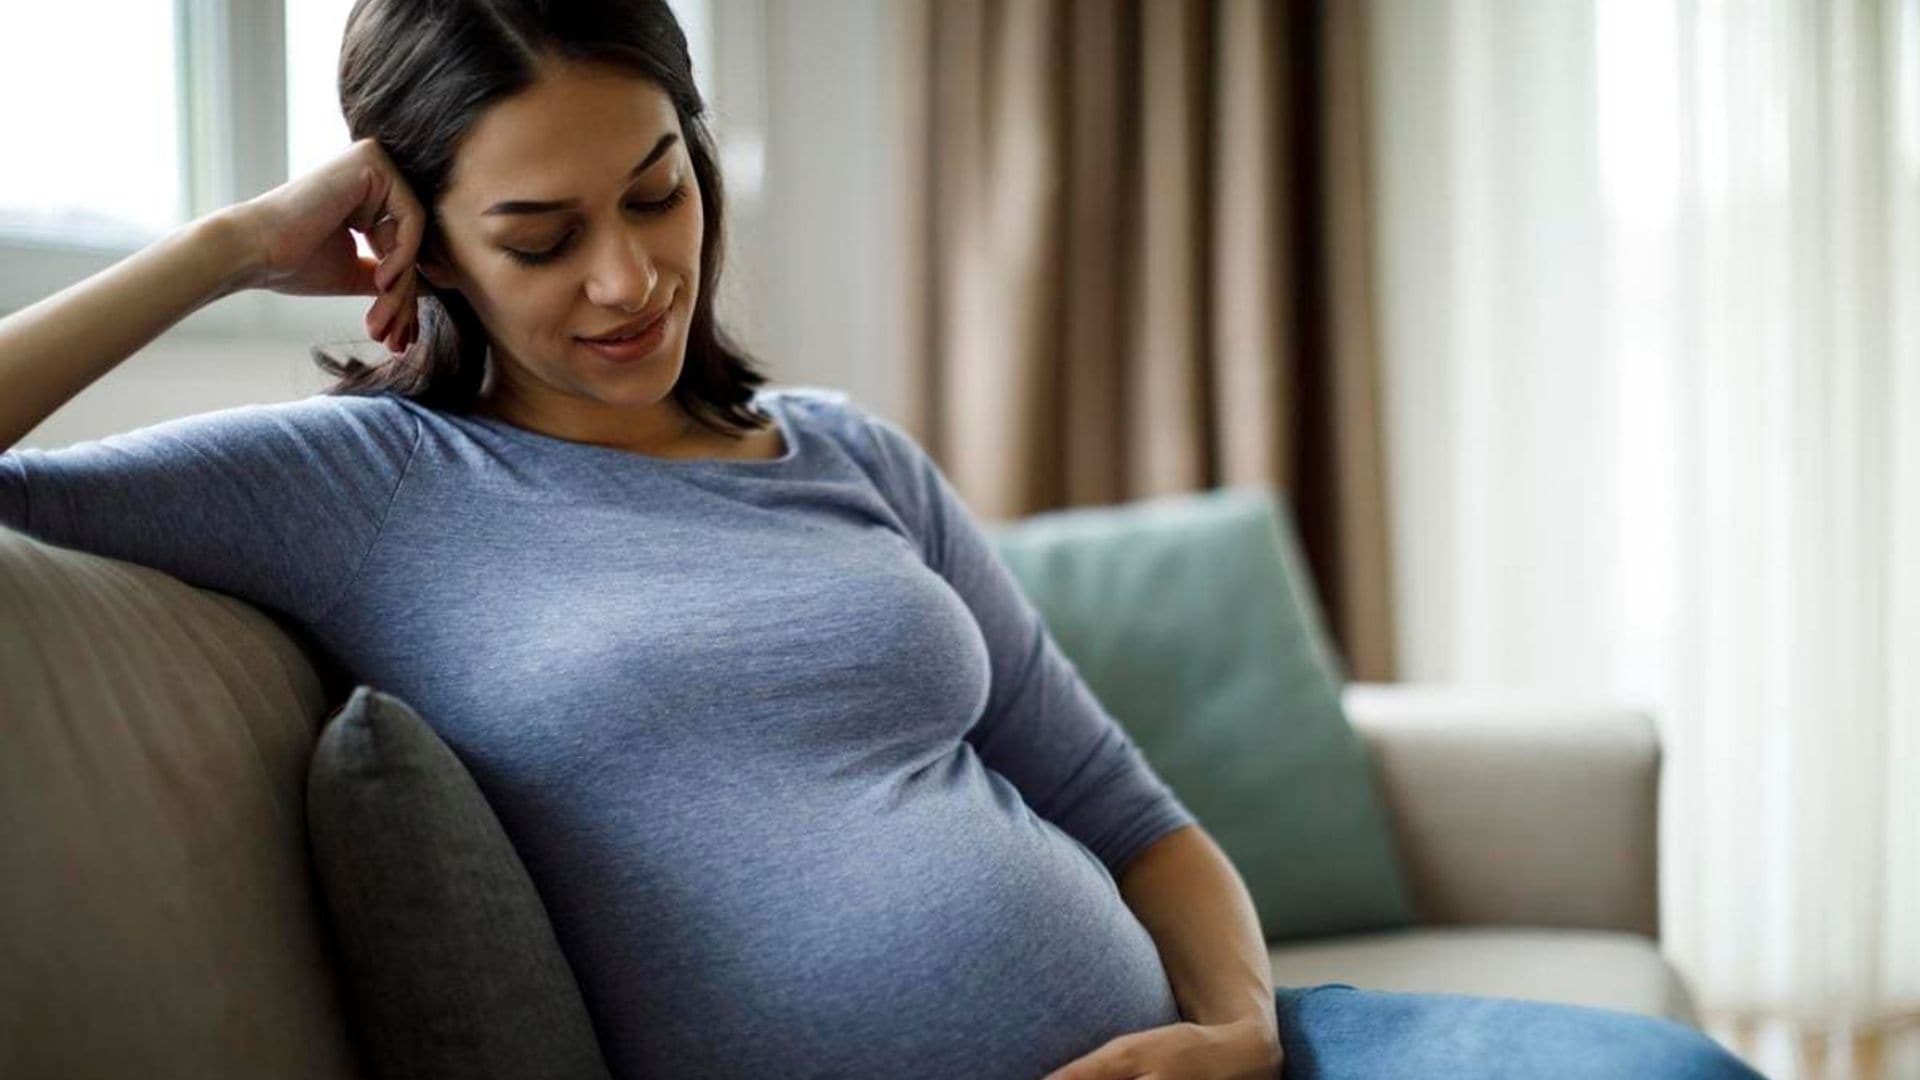 Getting pregnant adds months to a woman’s biological age, scientists reveal